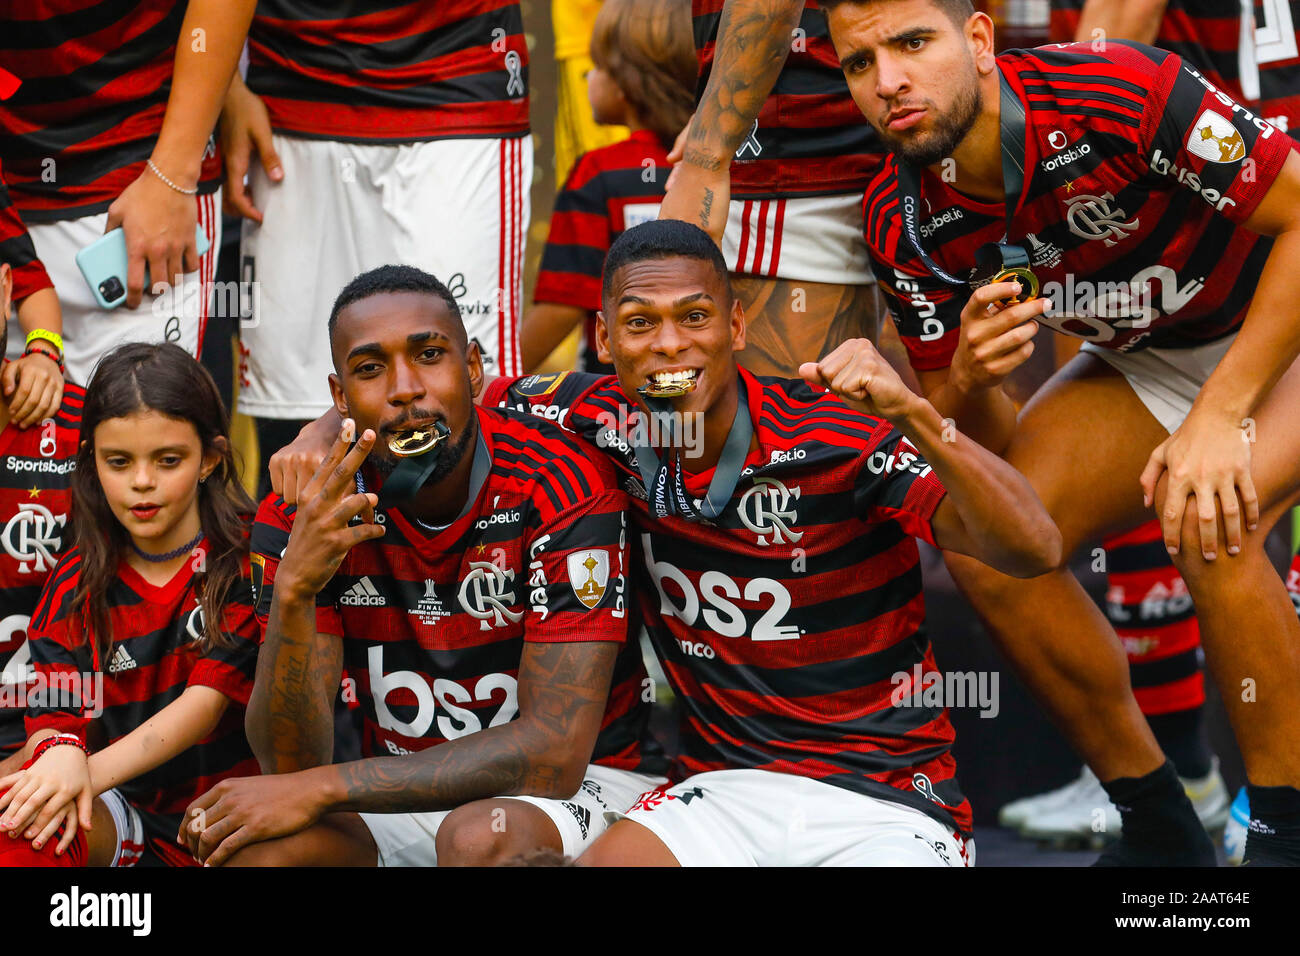 Lima, Peru. 23rd Nov, 2019. Gerson and Lucas Silva celebrate wins after the 2019 Copa Libertadores Final between Flamengo of Brazil and River Plate of Argentina at Estadio Monumental "U"  in Lima, Peru on 23 Nov 2019. Credit: SPP Sport Press Photo. /Alamy Live News Stock Photo